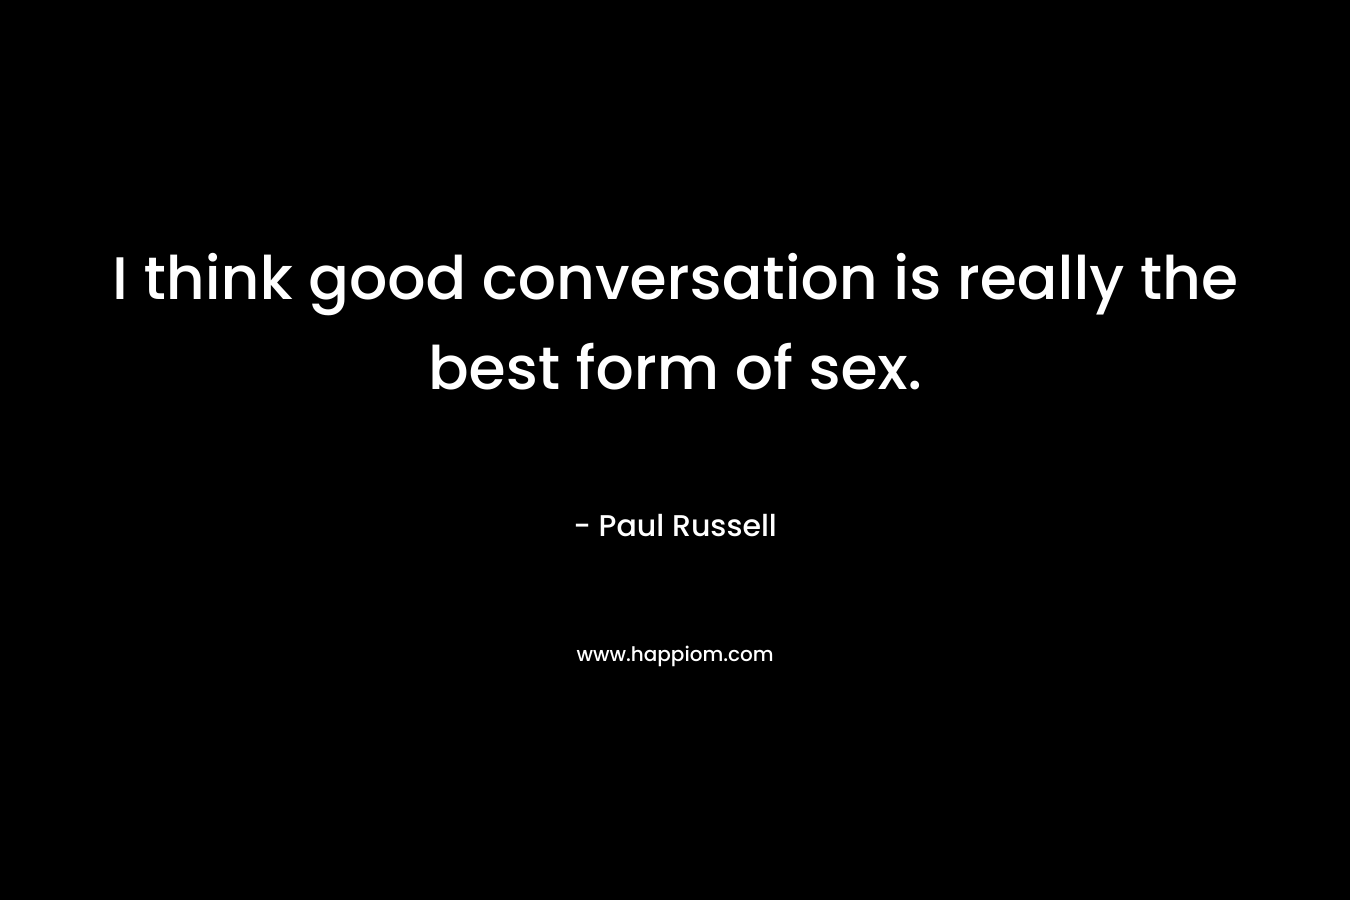 I think good conversation is really the best form of sex.